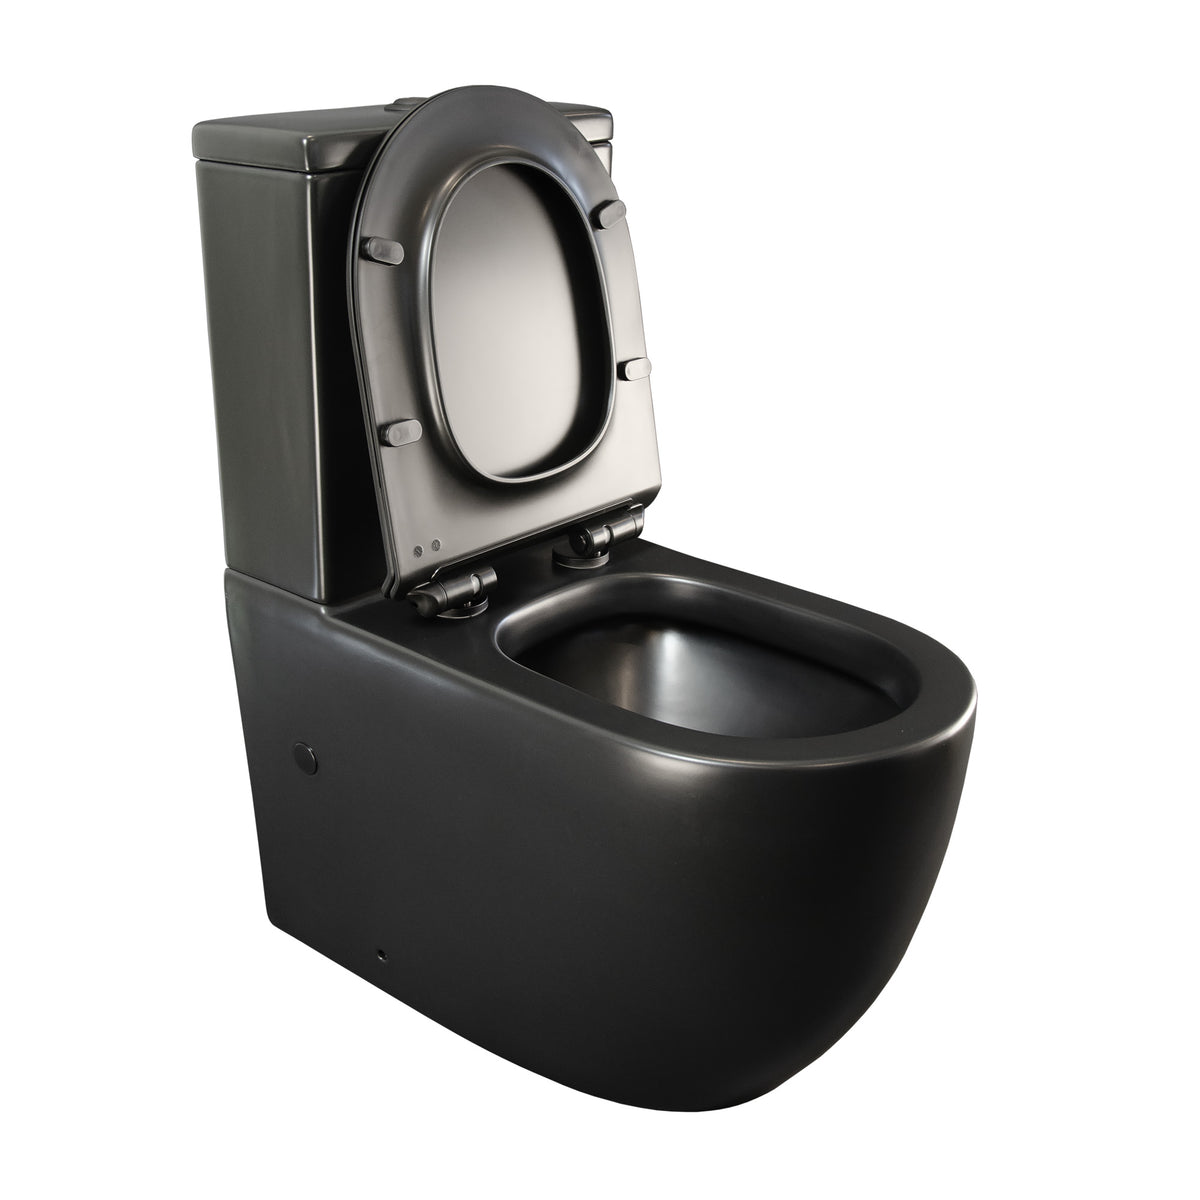 Hurricane Back-to-Wall Toilet Suite in Matte Black